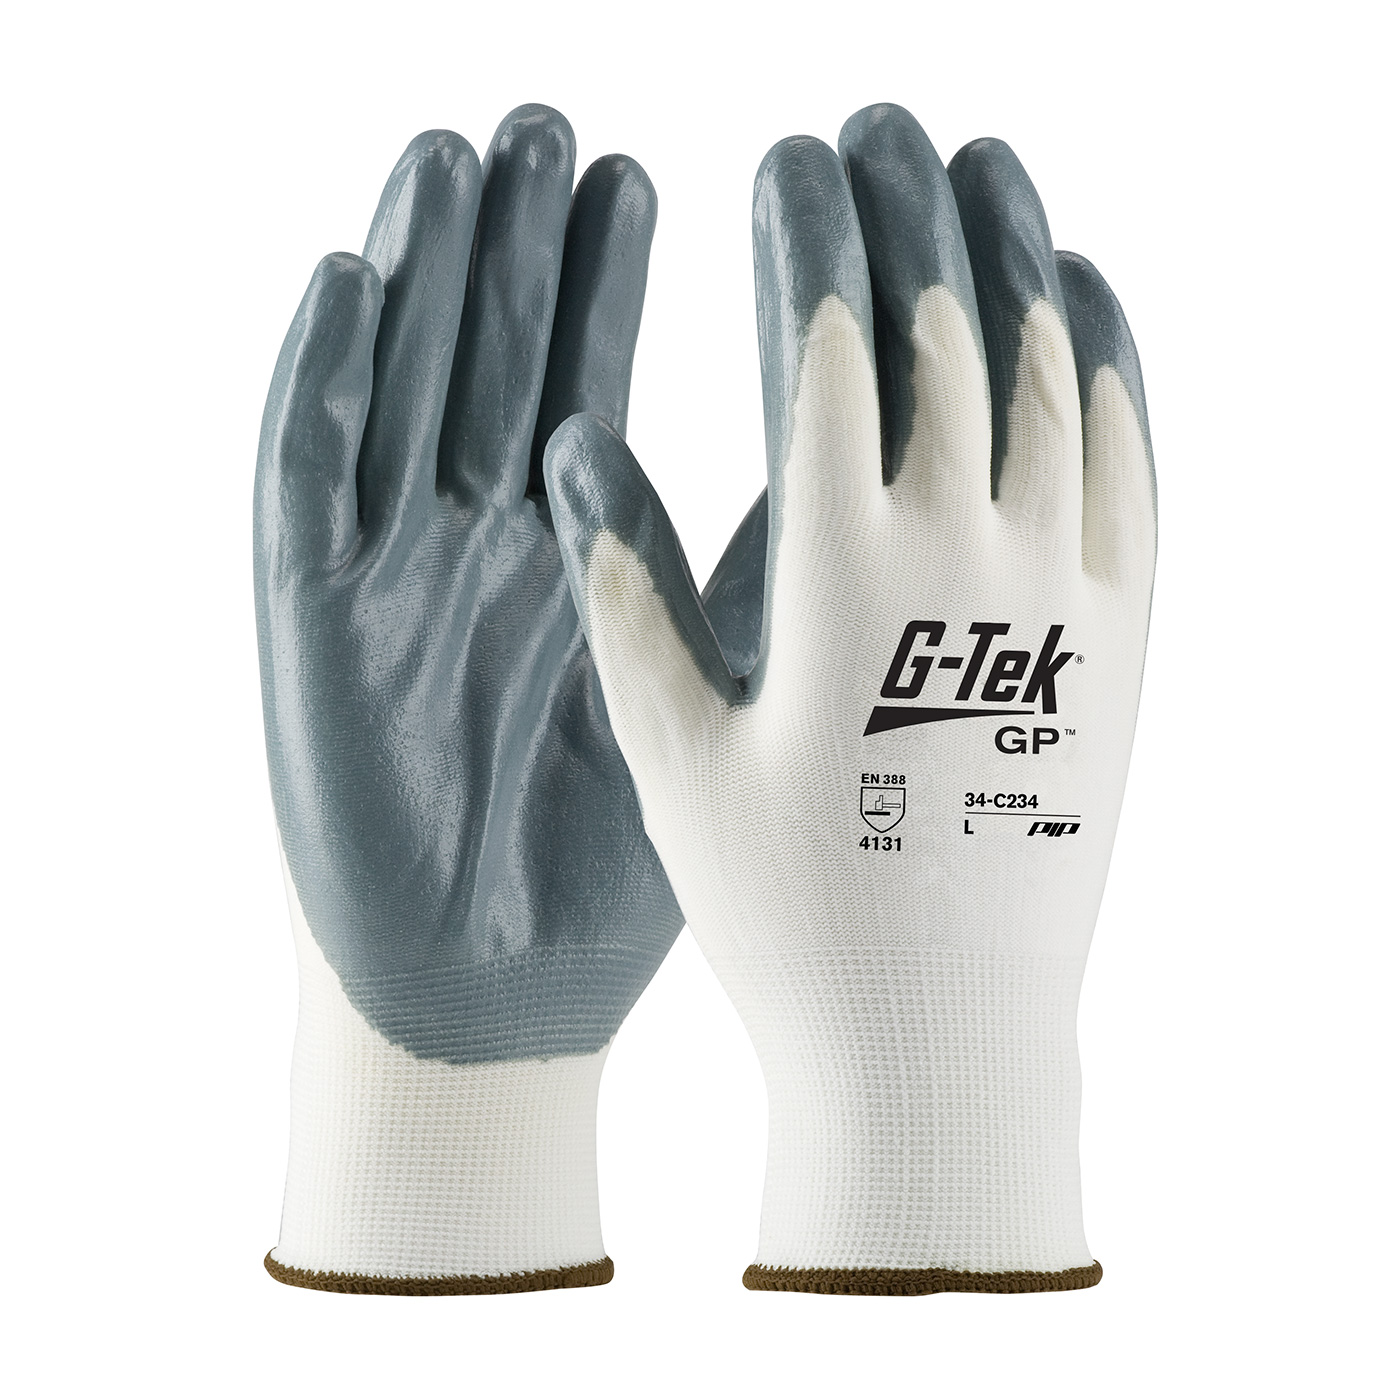 PIP 34-C234/S G-Tek Seamless Knit Nylon Glove with Nitrile Coated Foam Grip on Palm & Fingers - Economy Grad - Small PID-34 C234 S